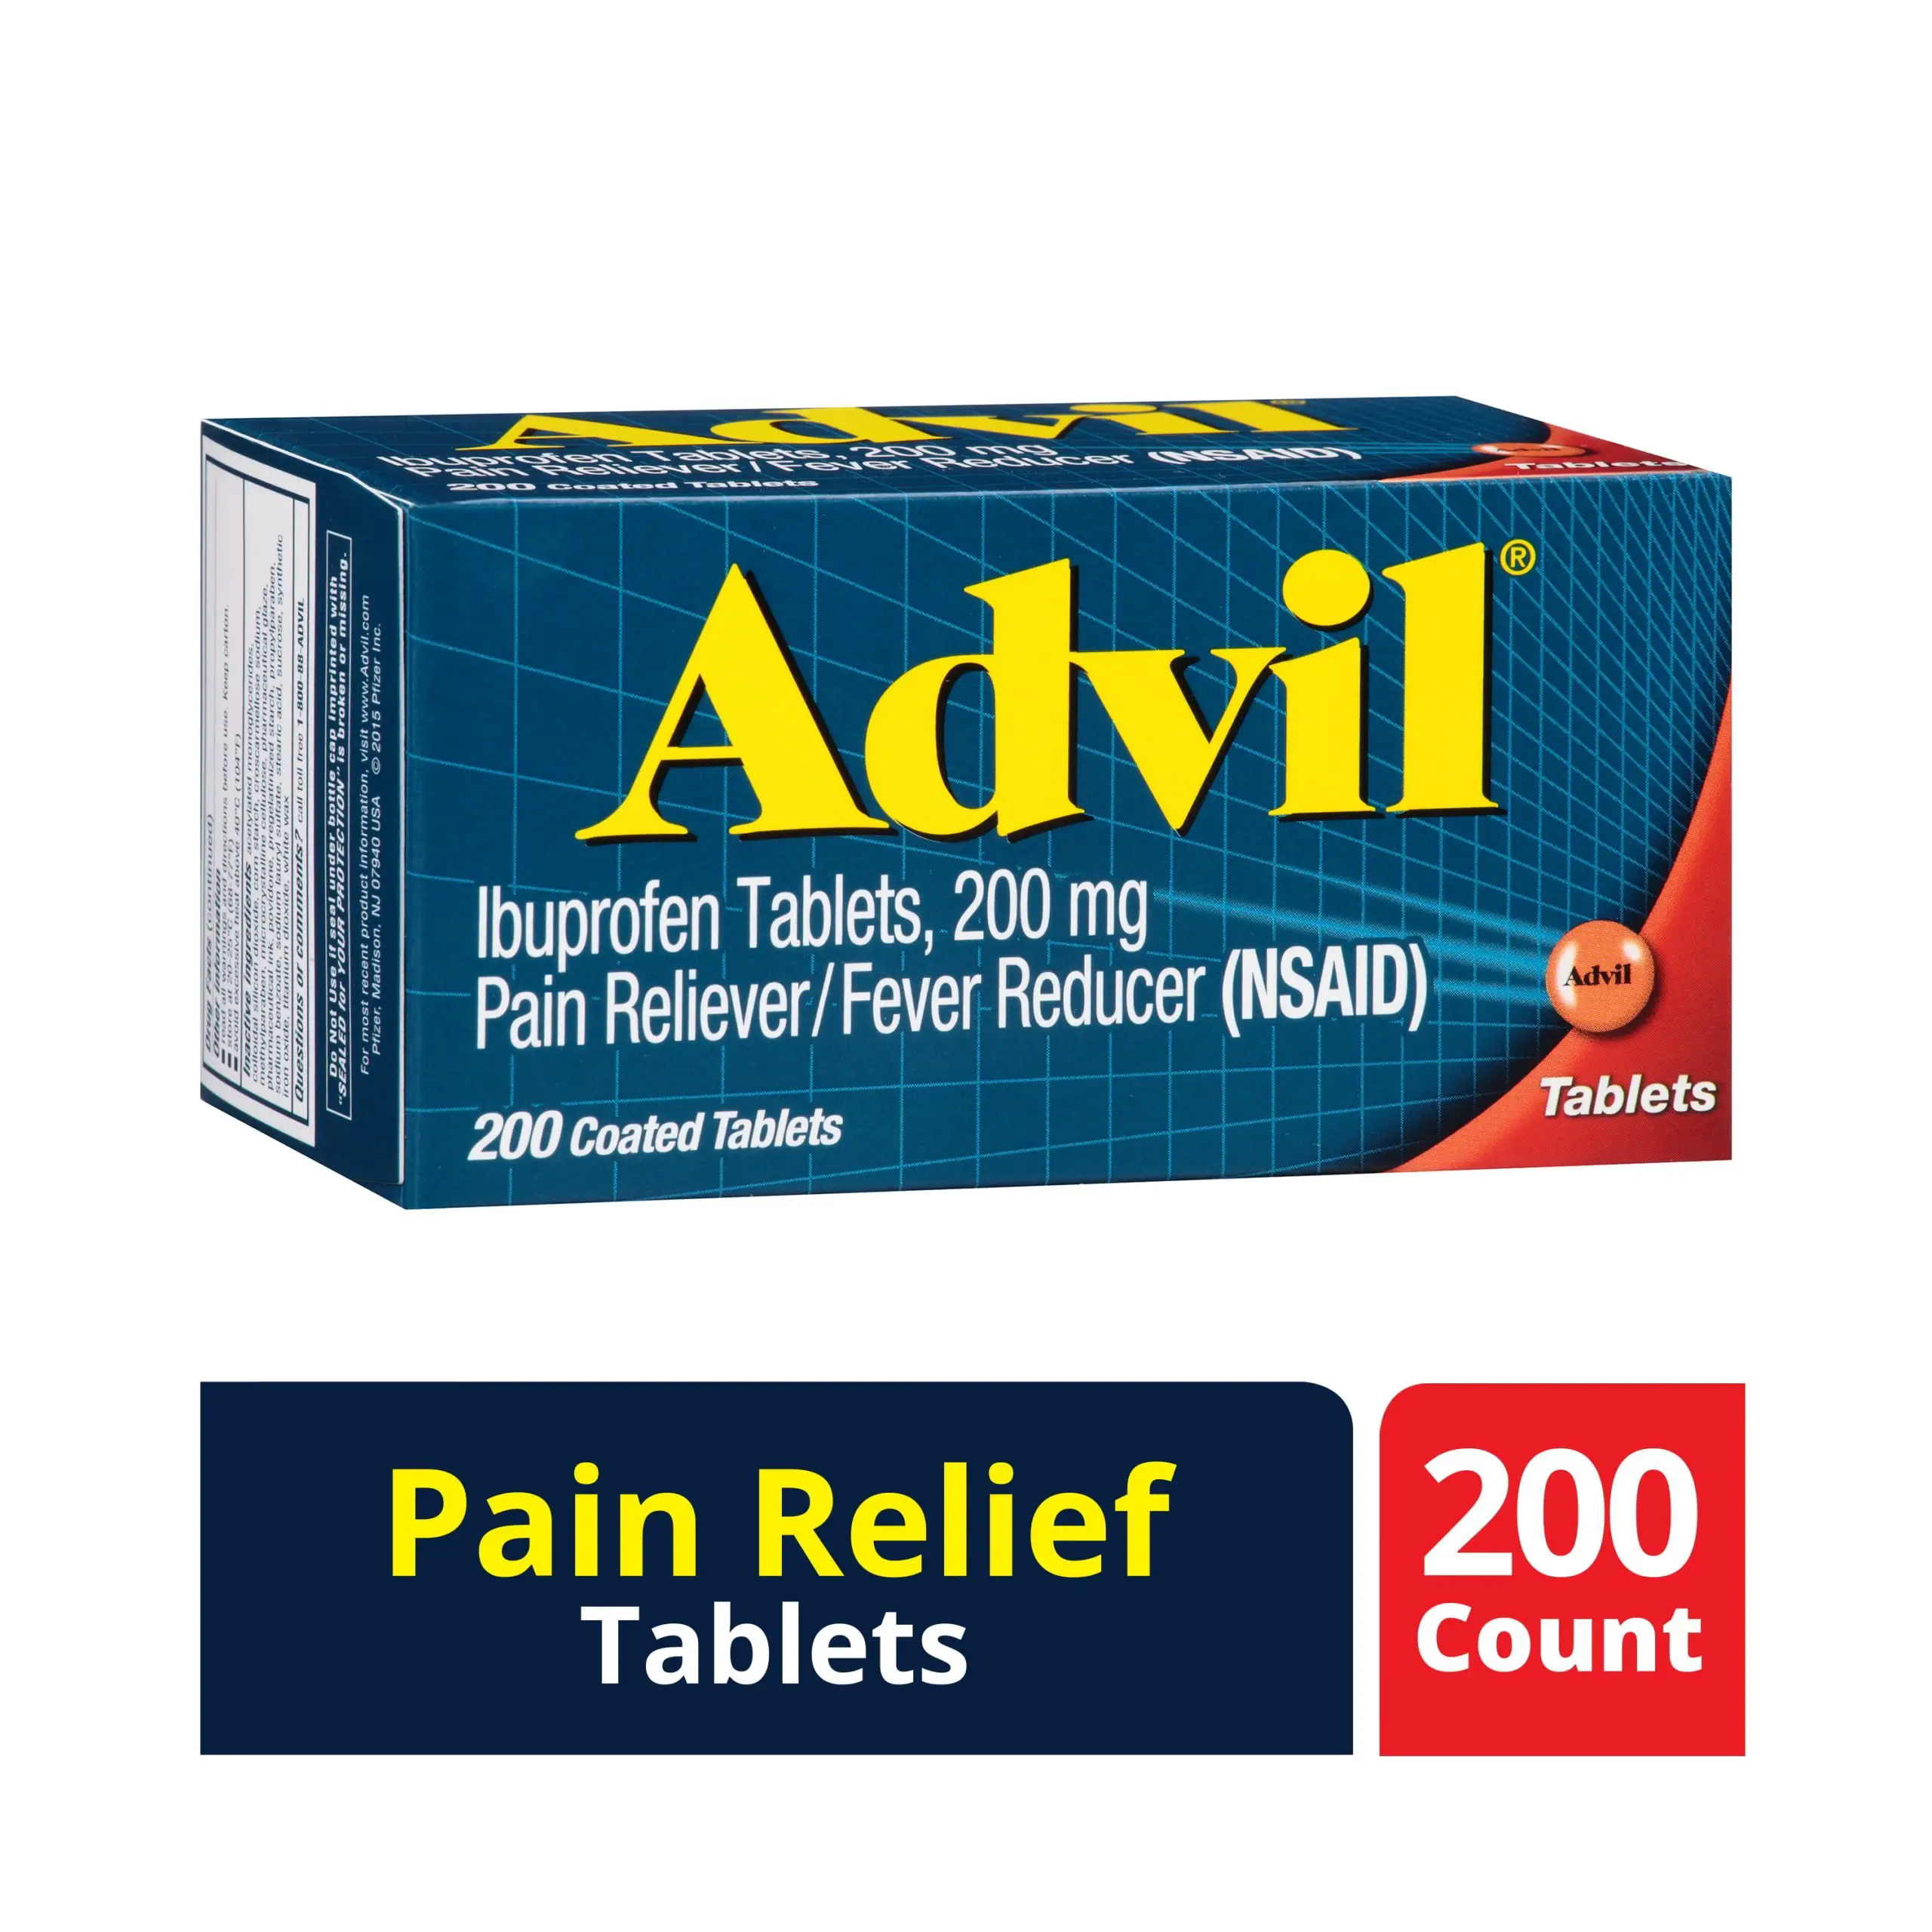 Advil Pain Reliever/Fever Reducer (Ibuprofen) 200mg Tablets 200 ct Box ...